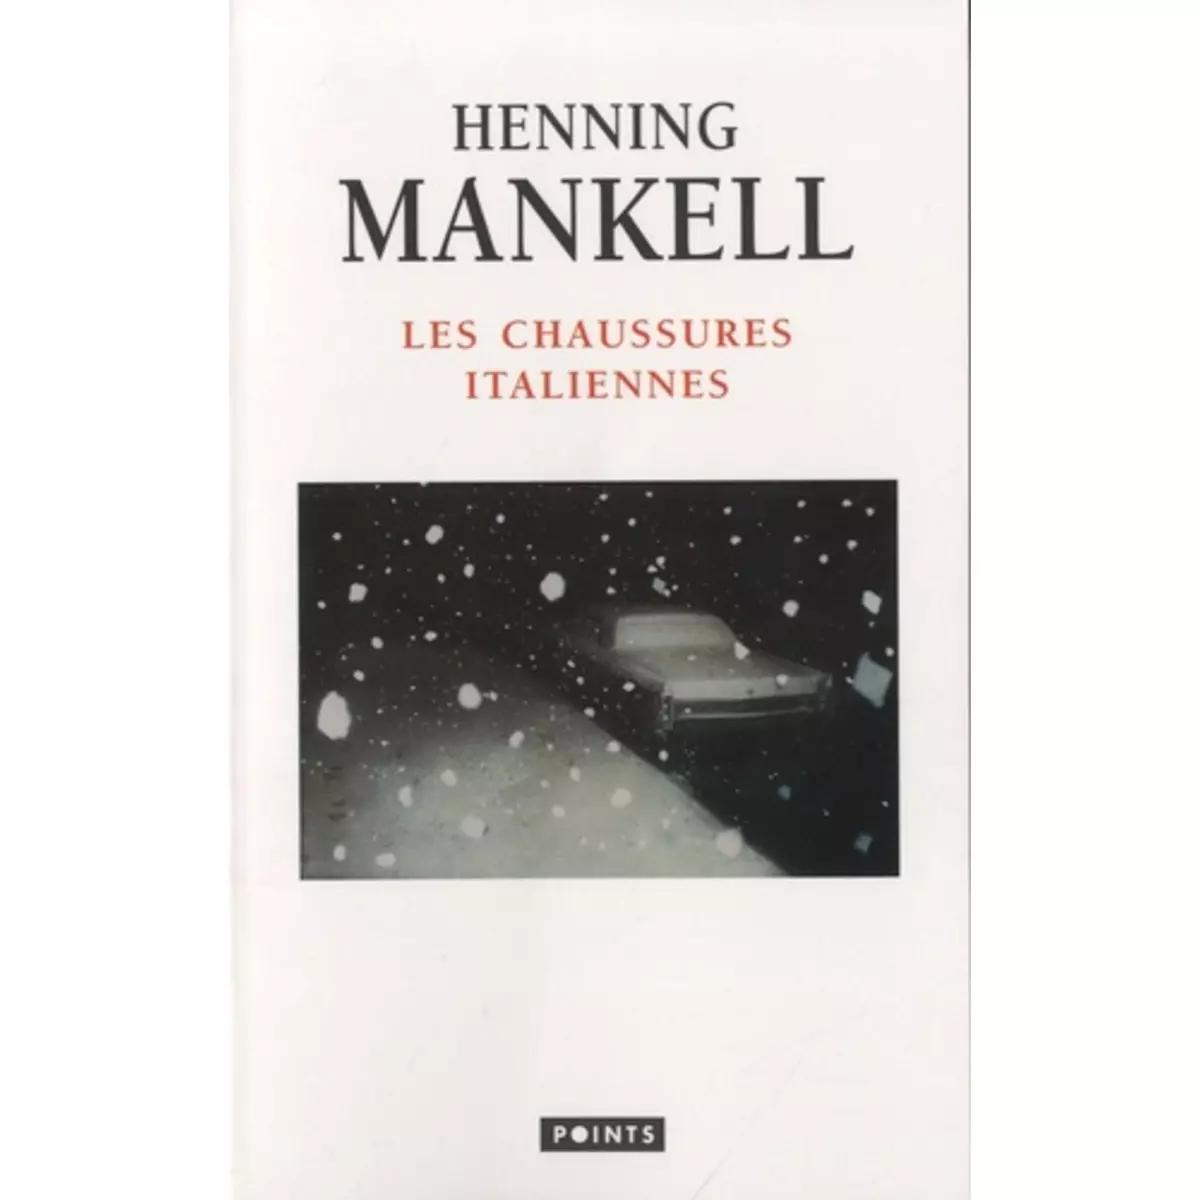  LES CHAUSSURES ITALIENNES, Mankell Henning